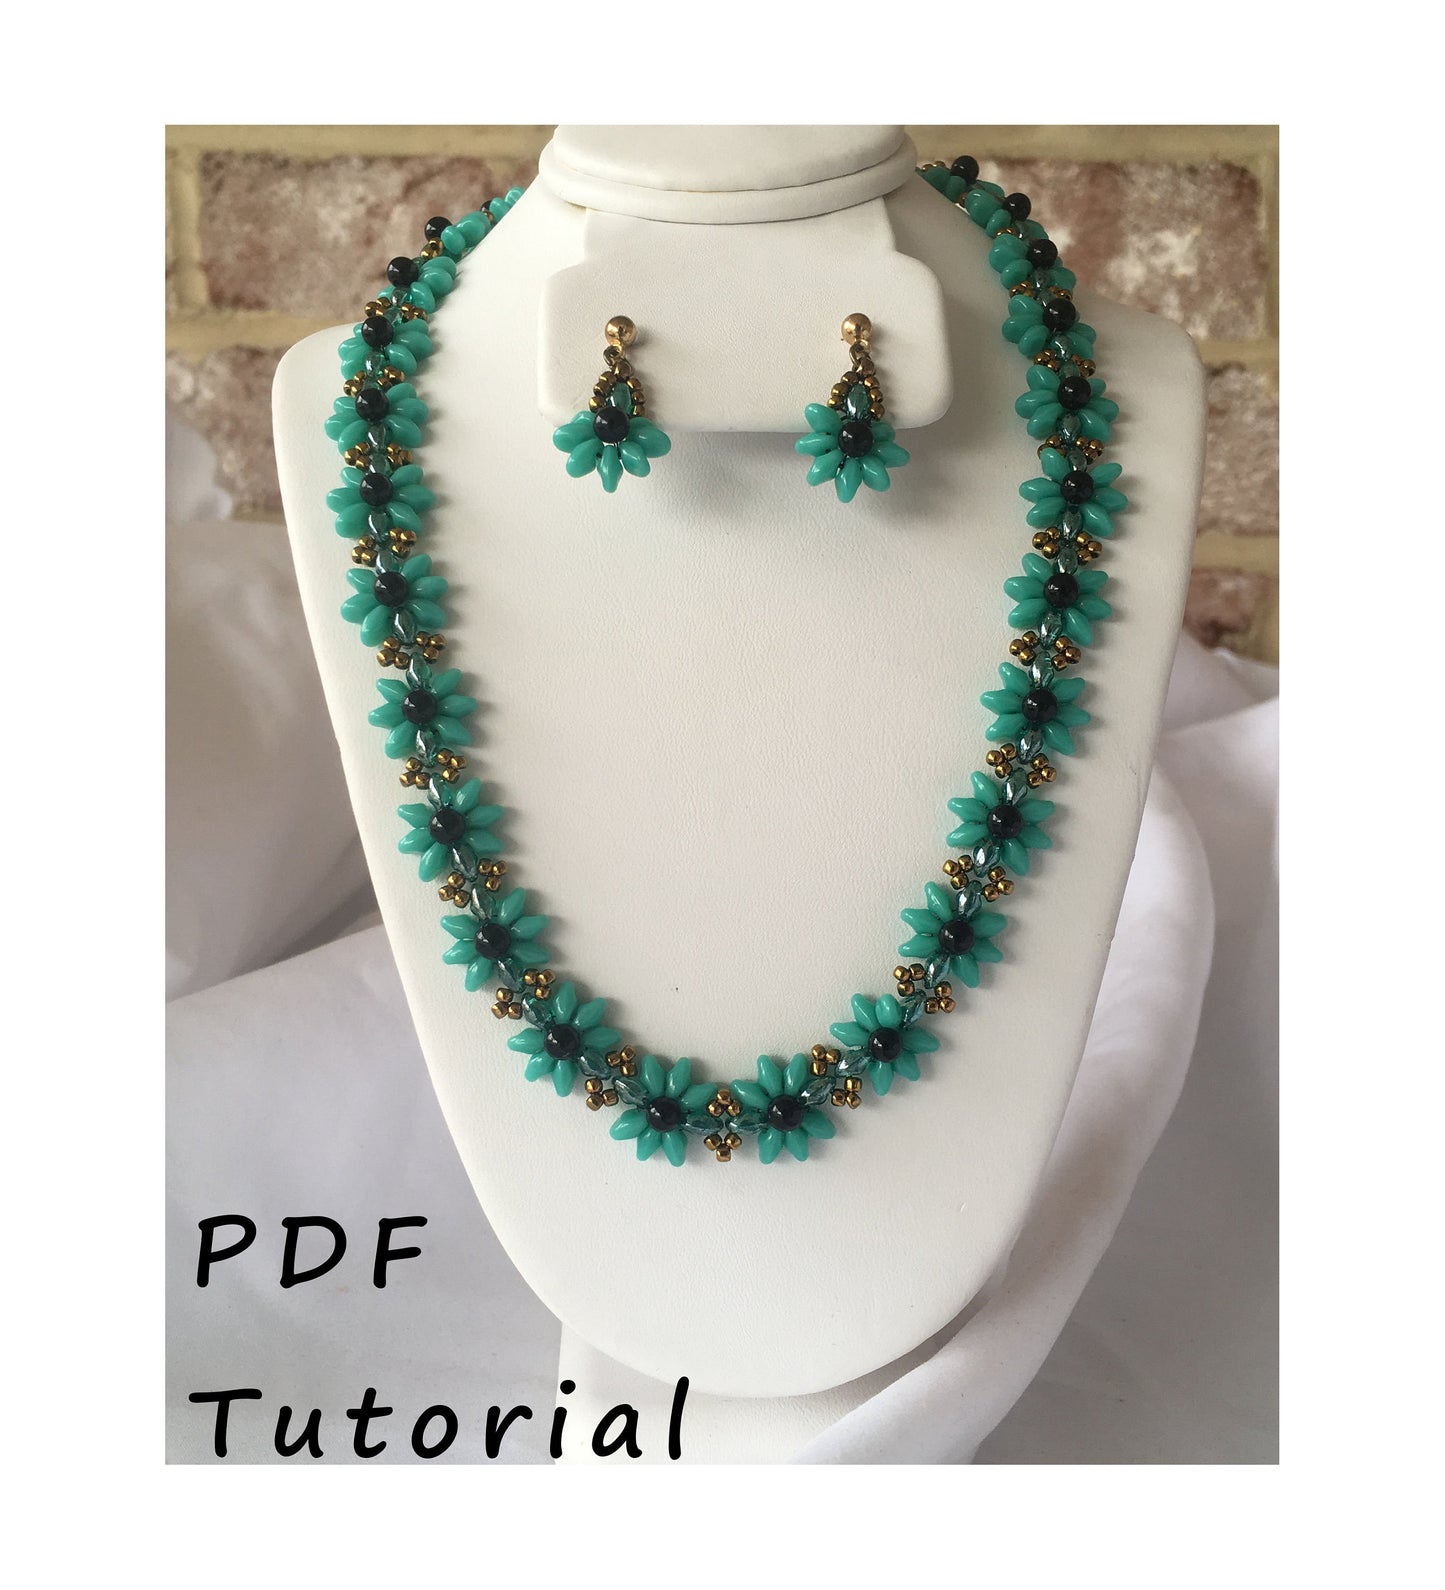 Pretty Posy Necklace and Earring Set PDF Tutorial/Pattern/Instructions